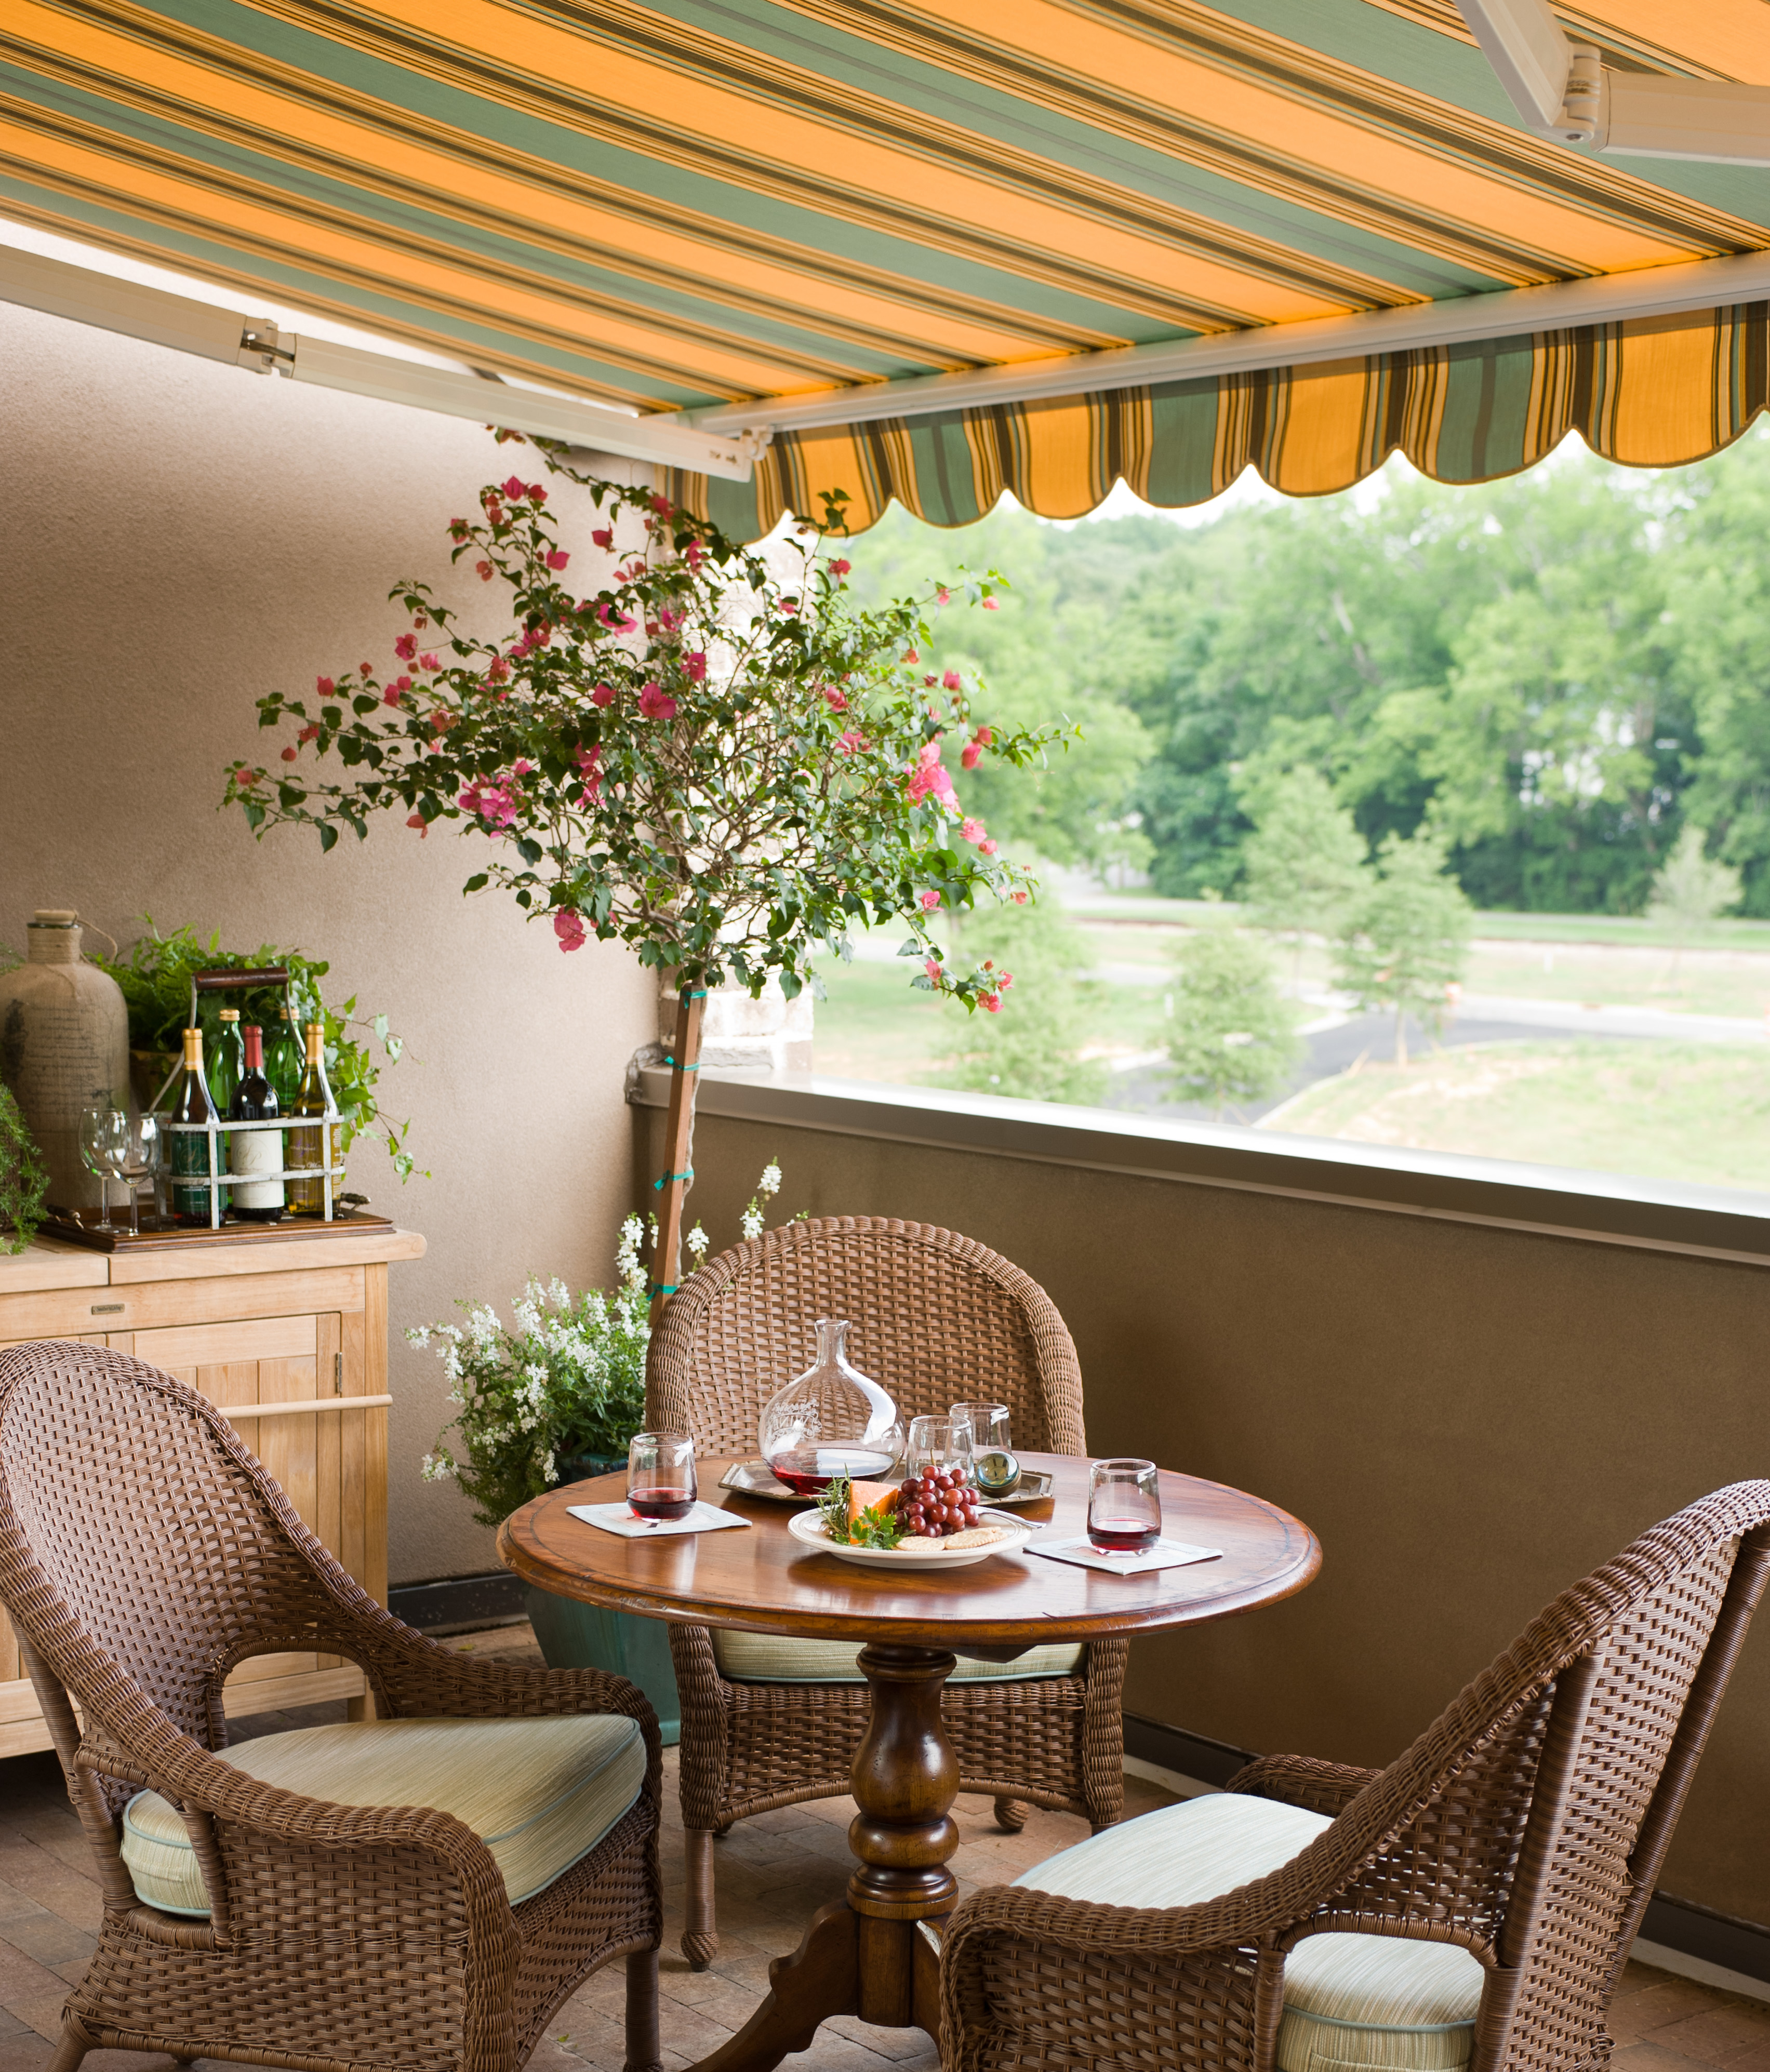 residential retractable awning